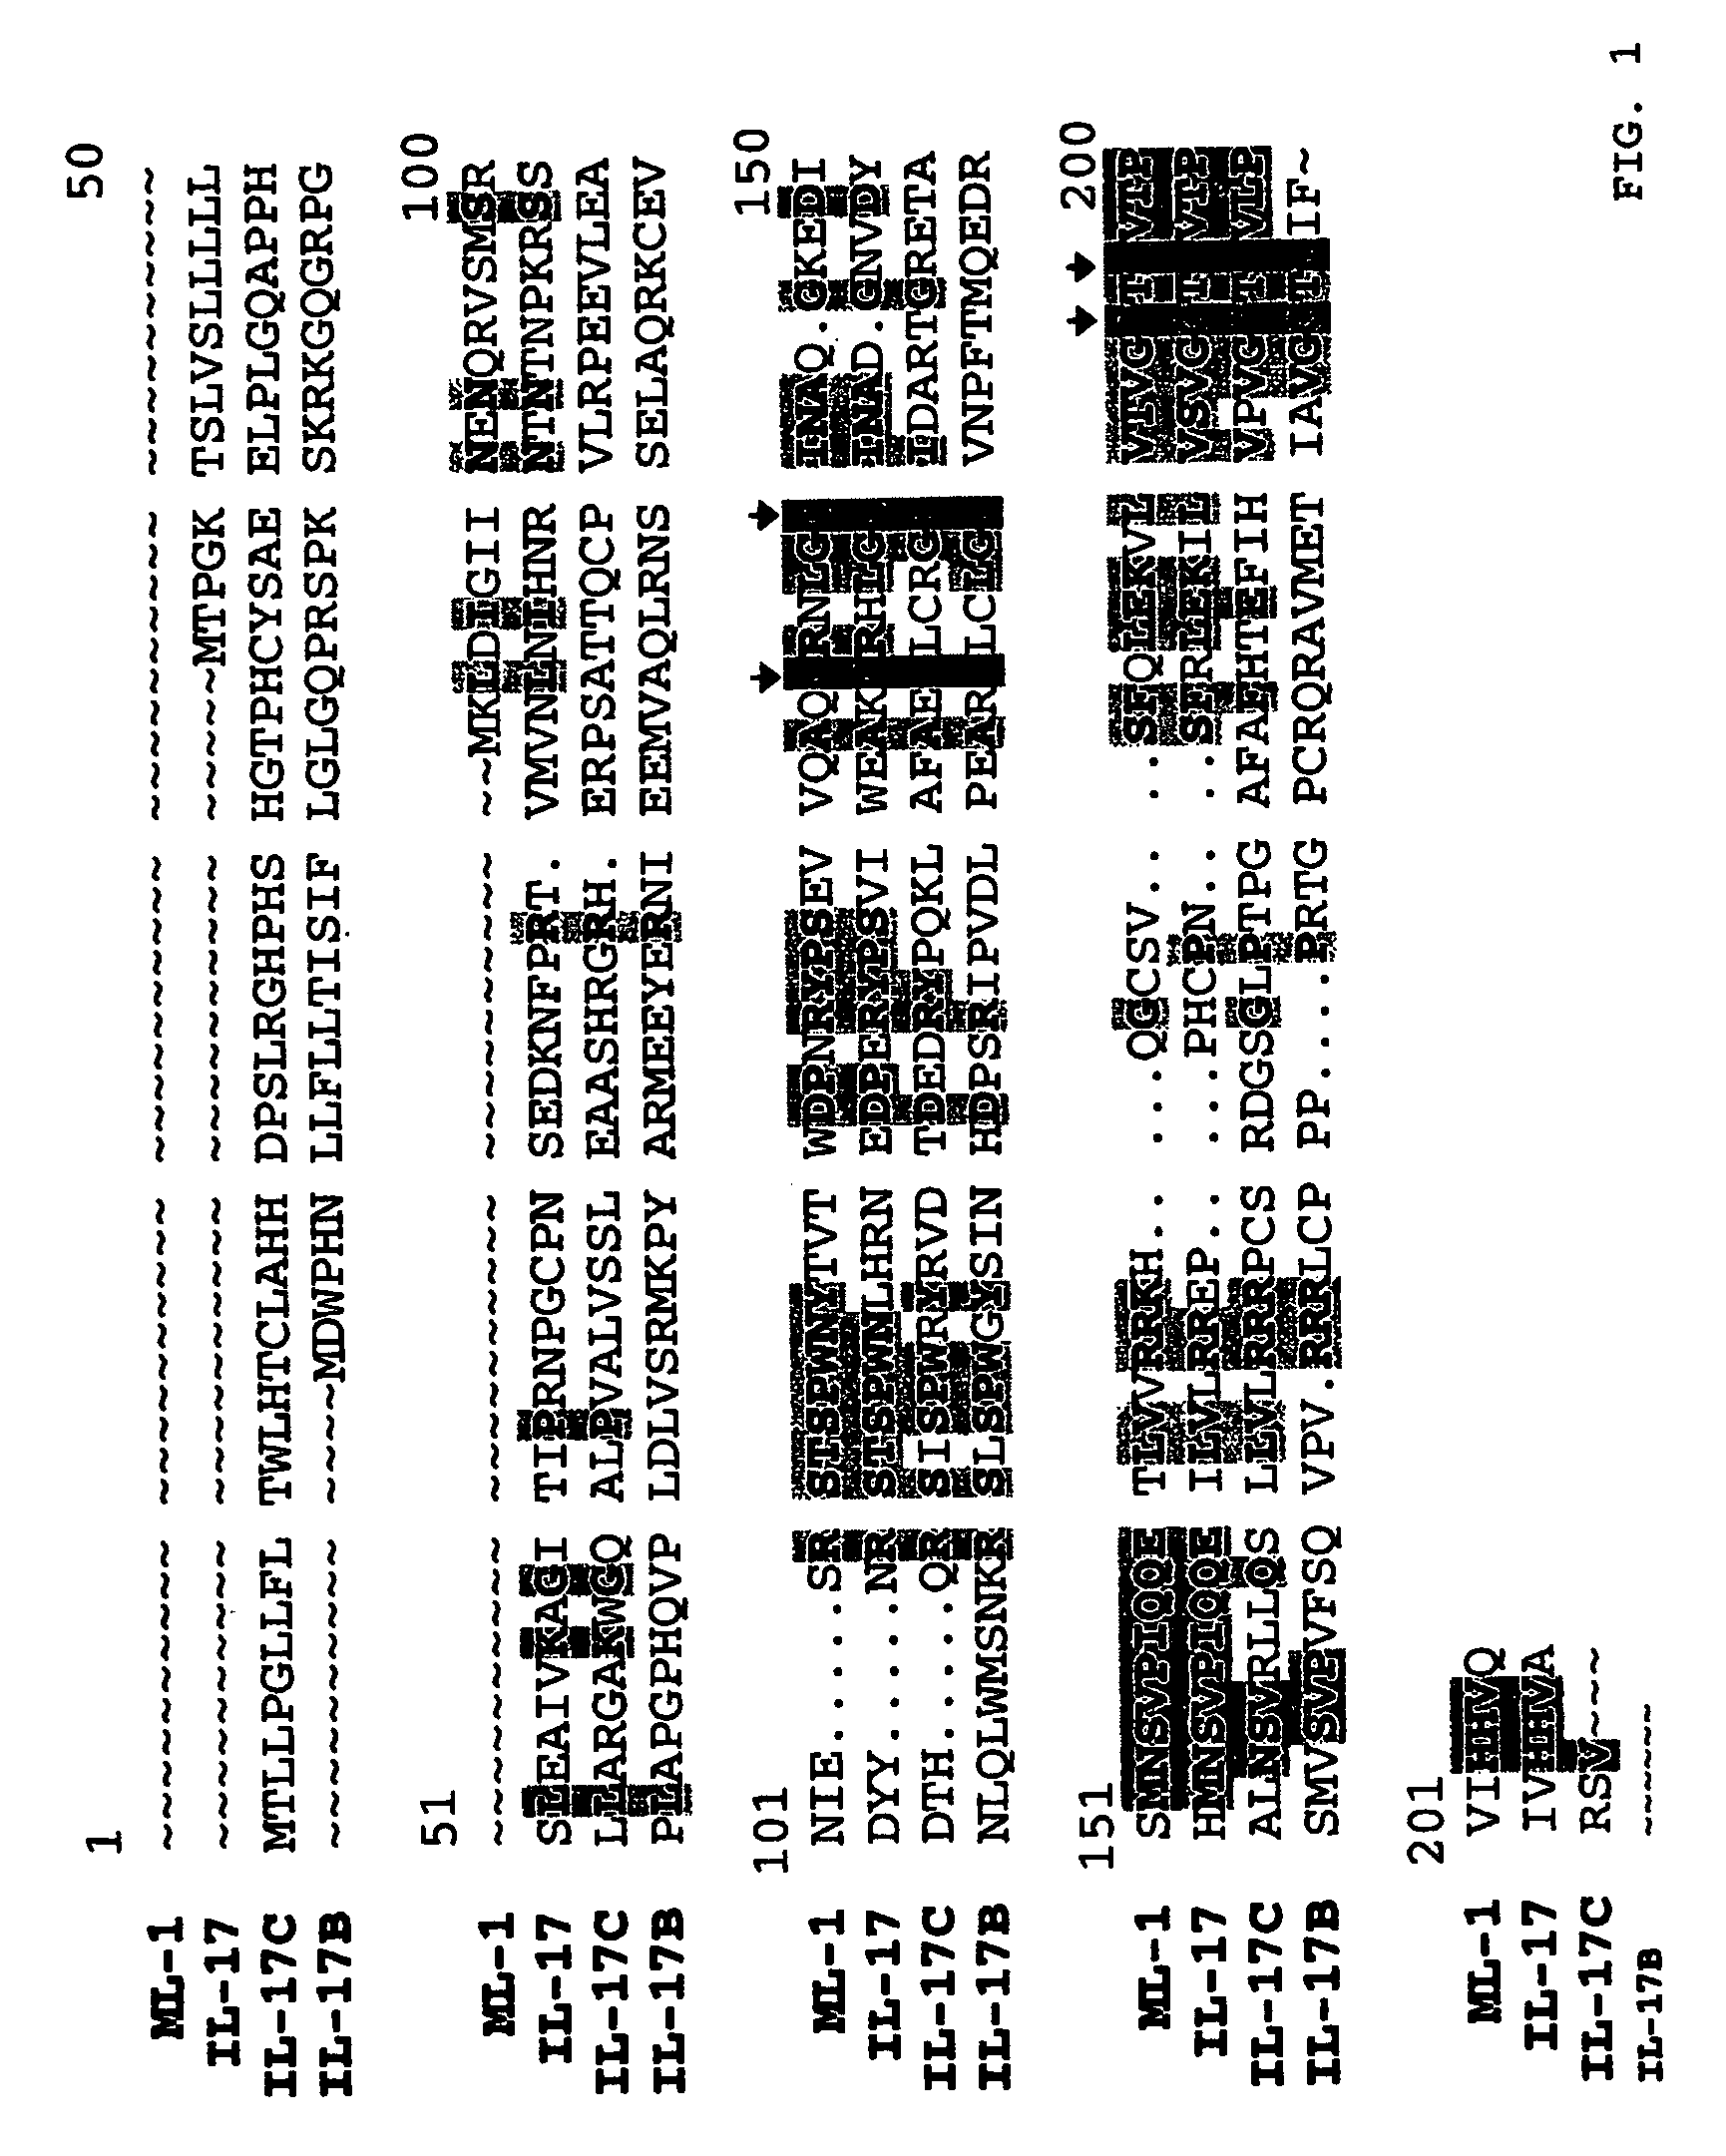 Cytokine structurally related to IL-17